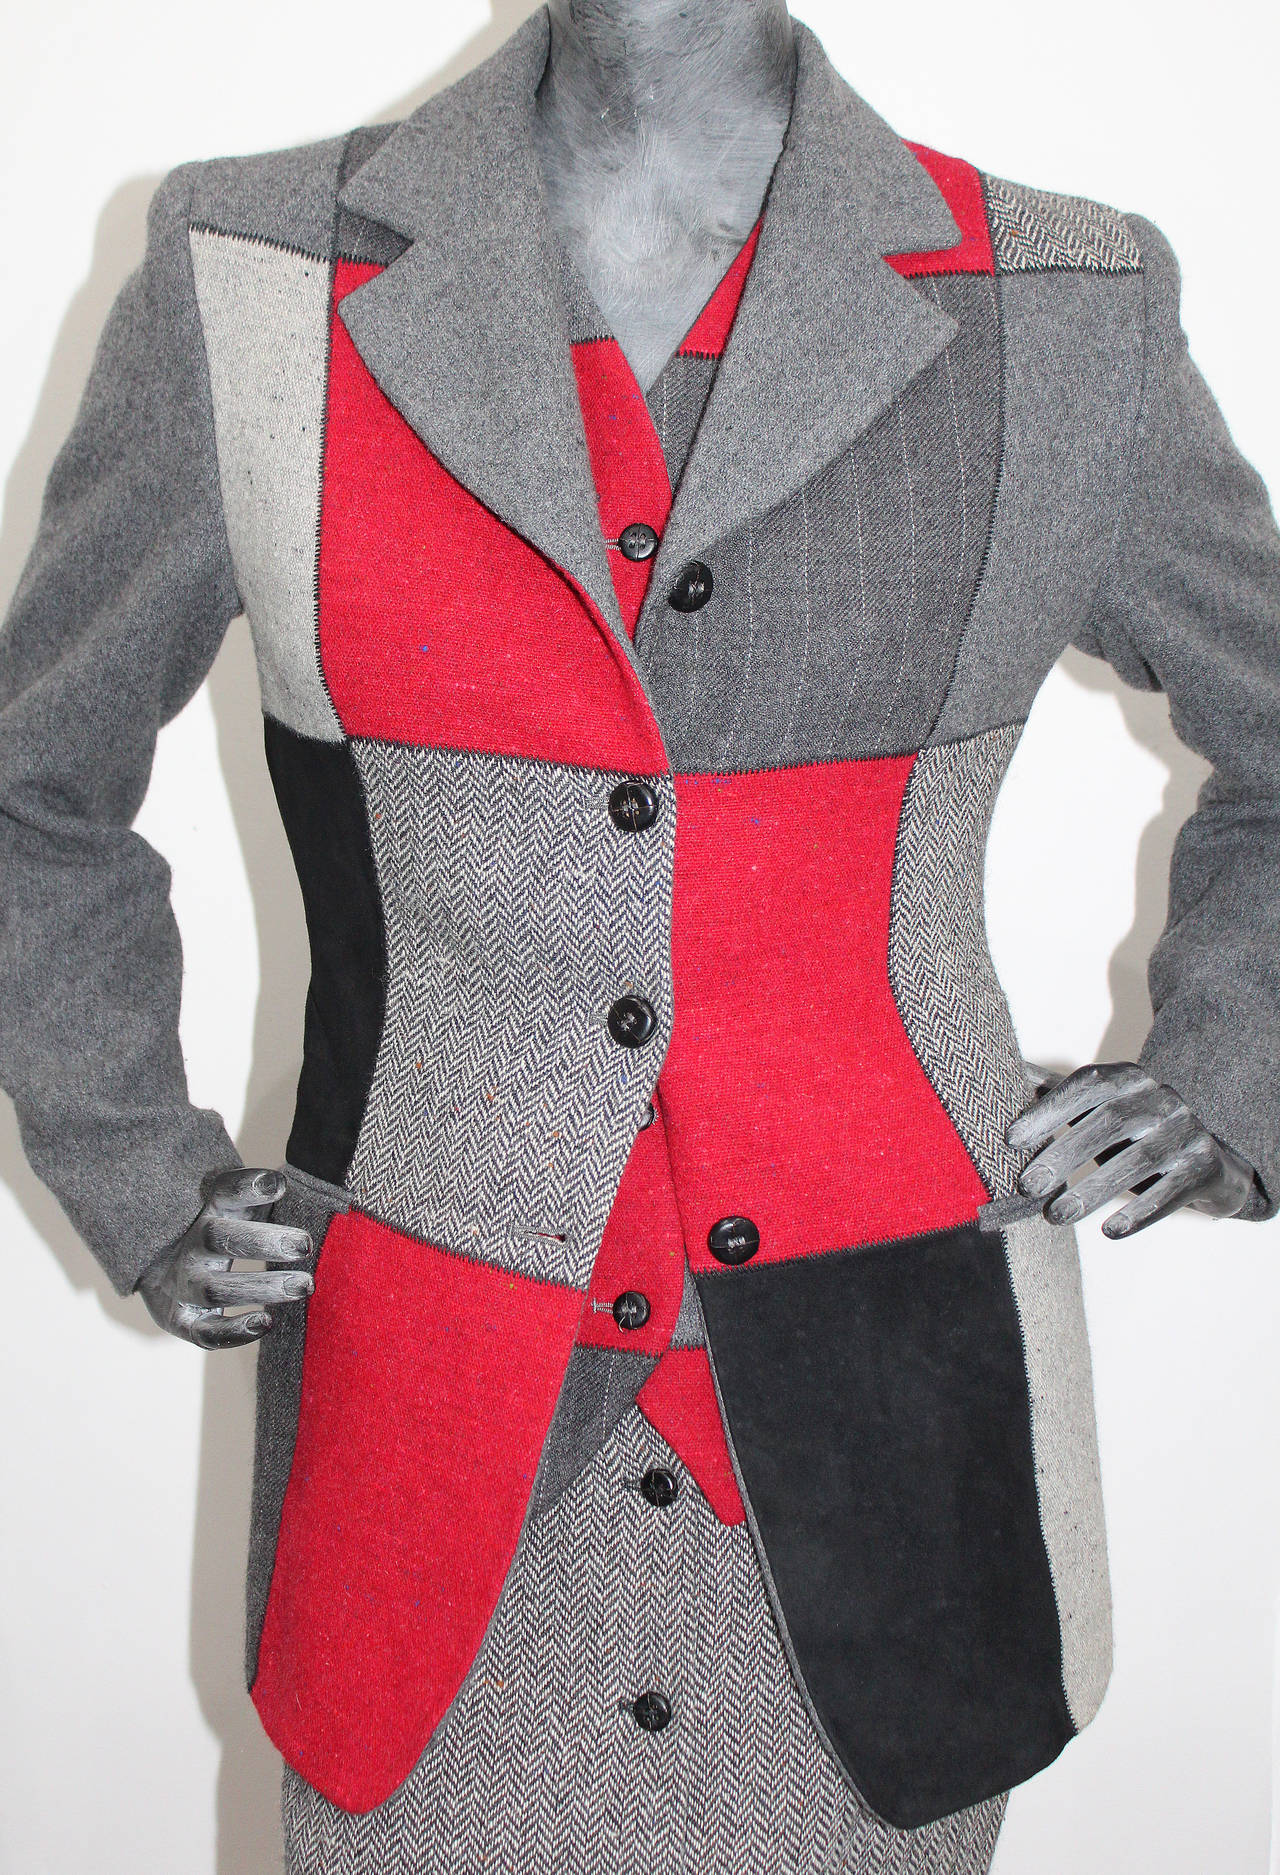 A fine and rare 'WOODY WOODPECKER' Jean Charles De Castelbajac 3 piece tweed skirt suit from 1994. 

The suit features a tailored blazer and waistcoat both in patchwork tweed with black suede assets. The high waisted pencil skirt is in a fine